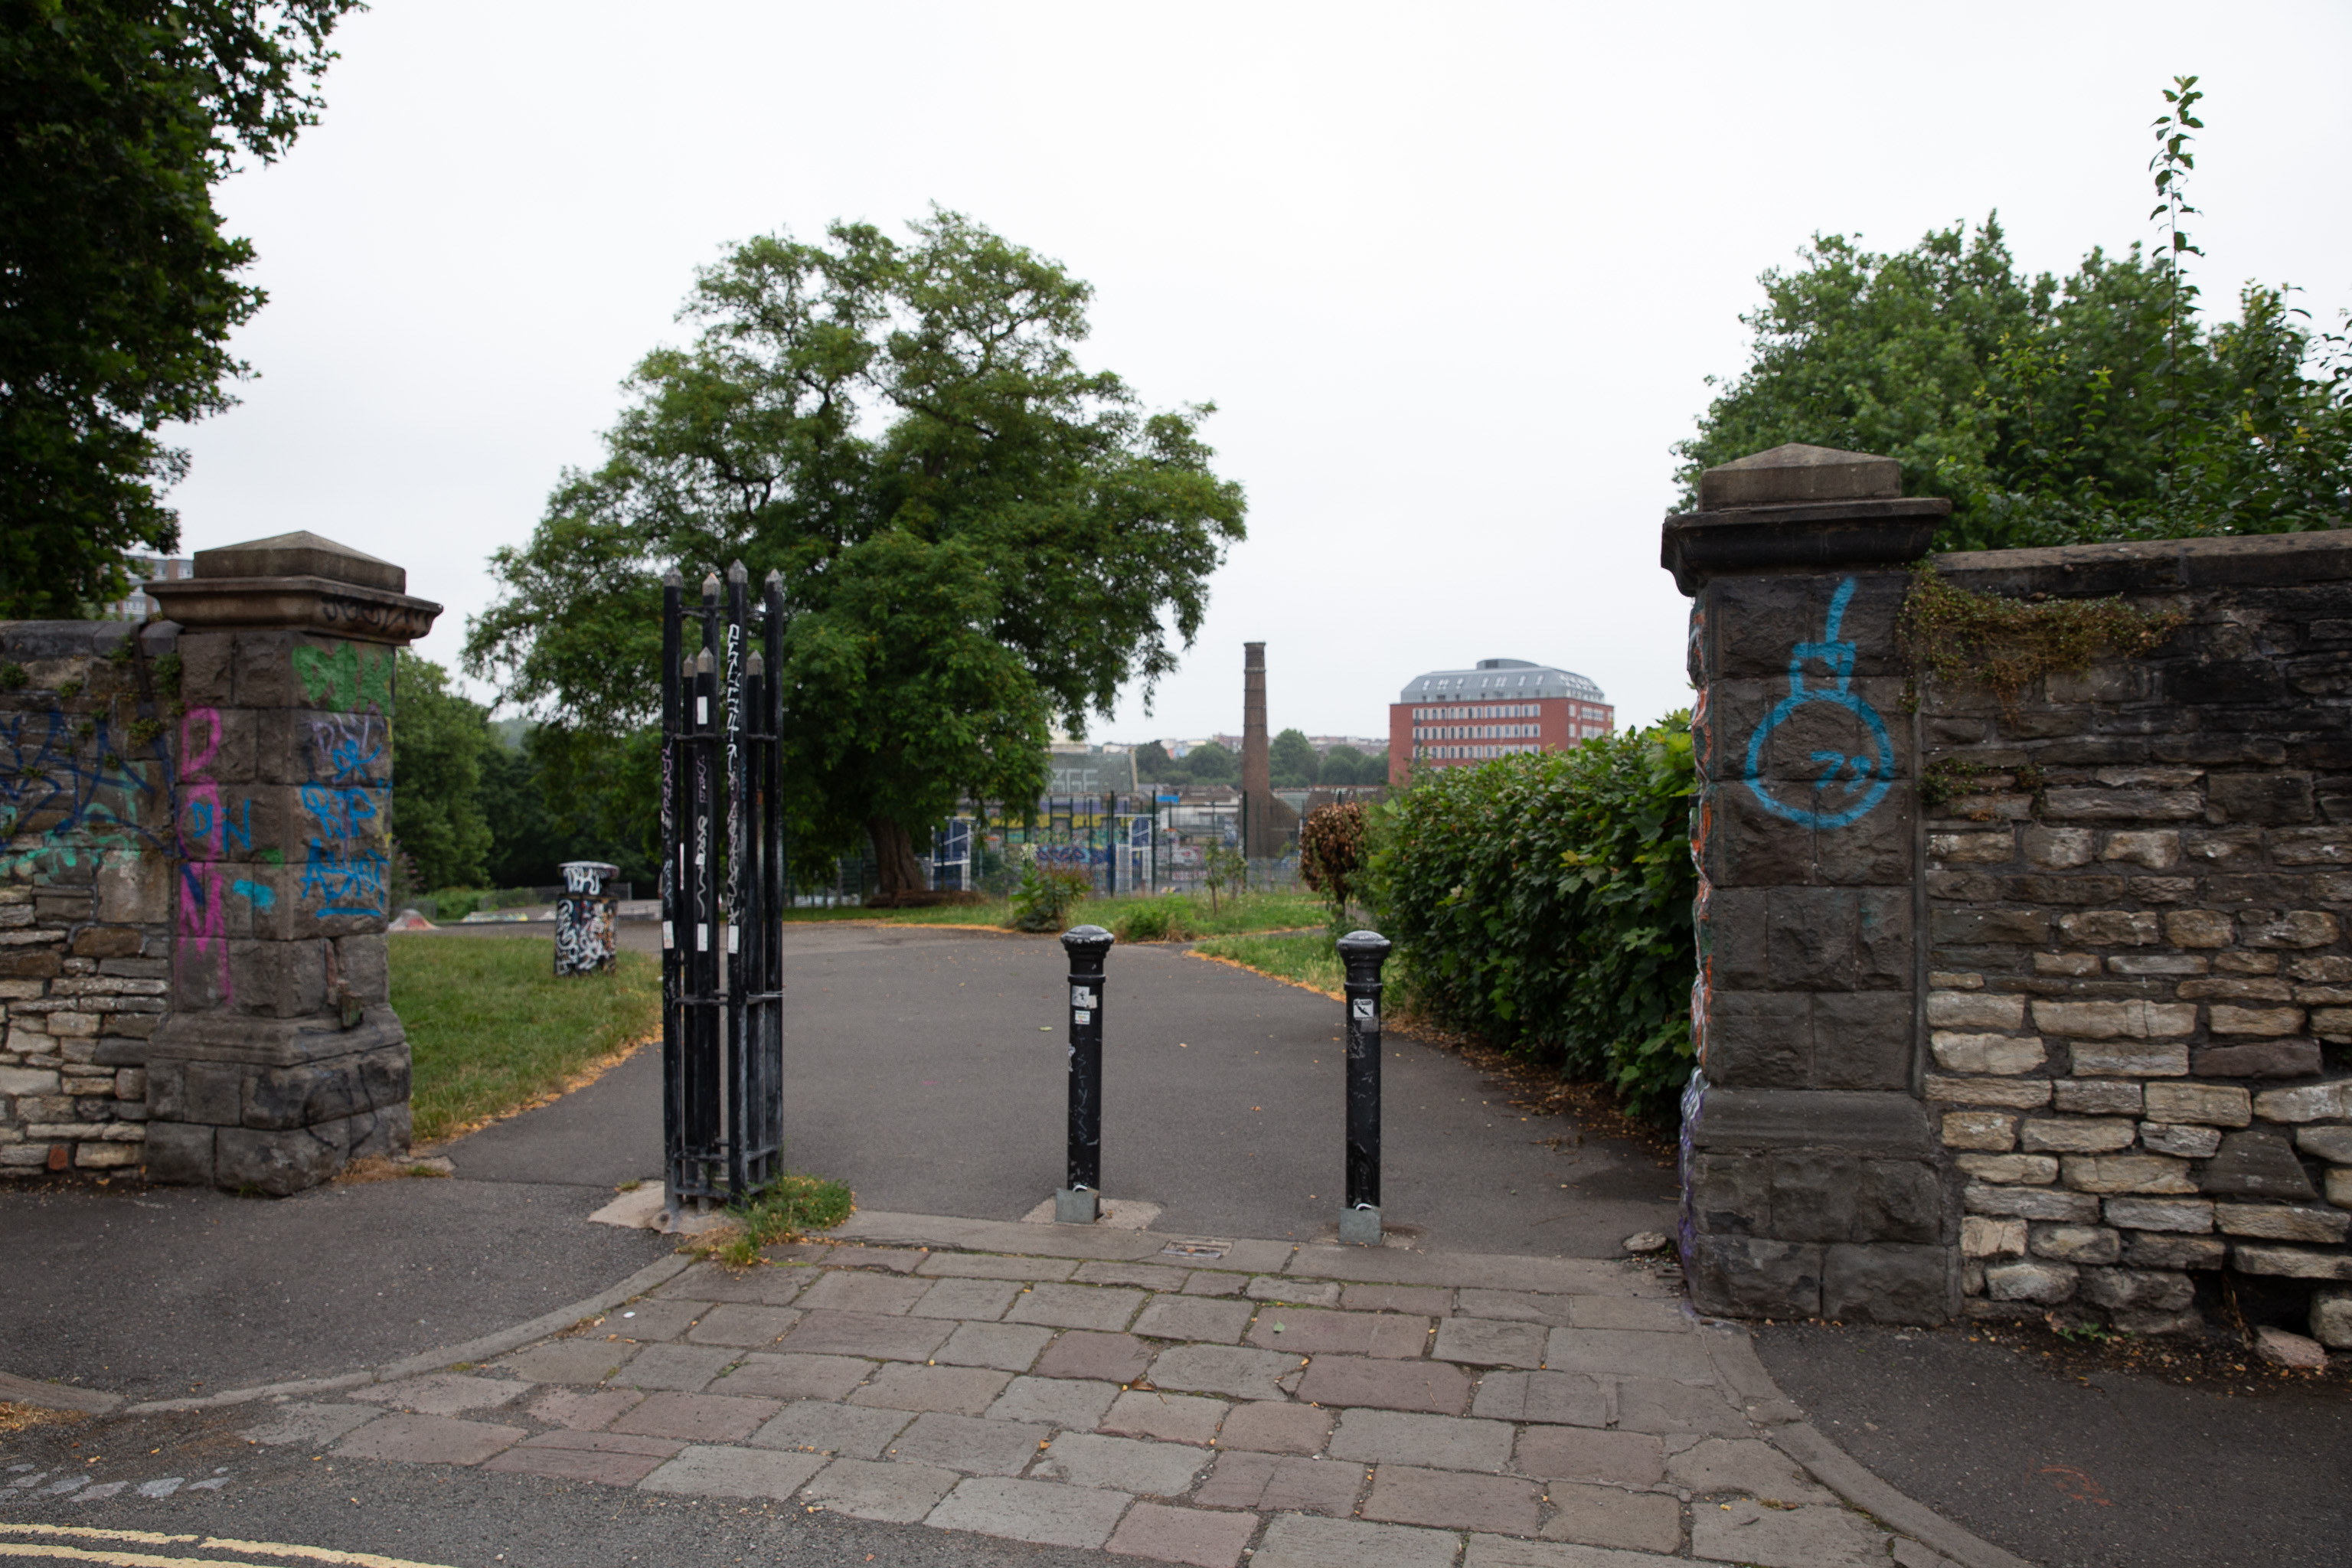 Dame Emily Park
Must be nice for Morley Road to have its own entrance onto the park. Dame Emily Smyth was one of the last members of the Smyth family (as in Grevil...